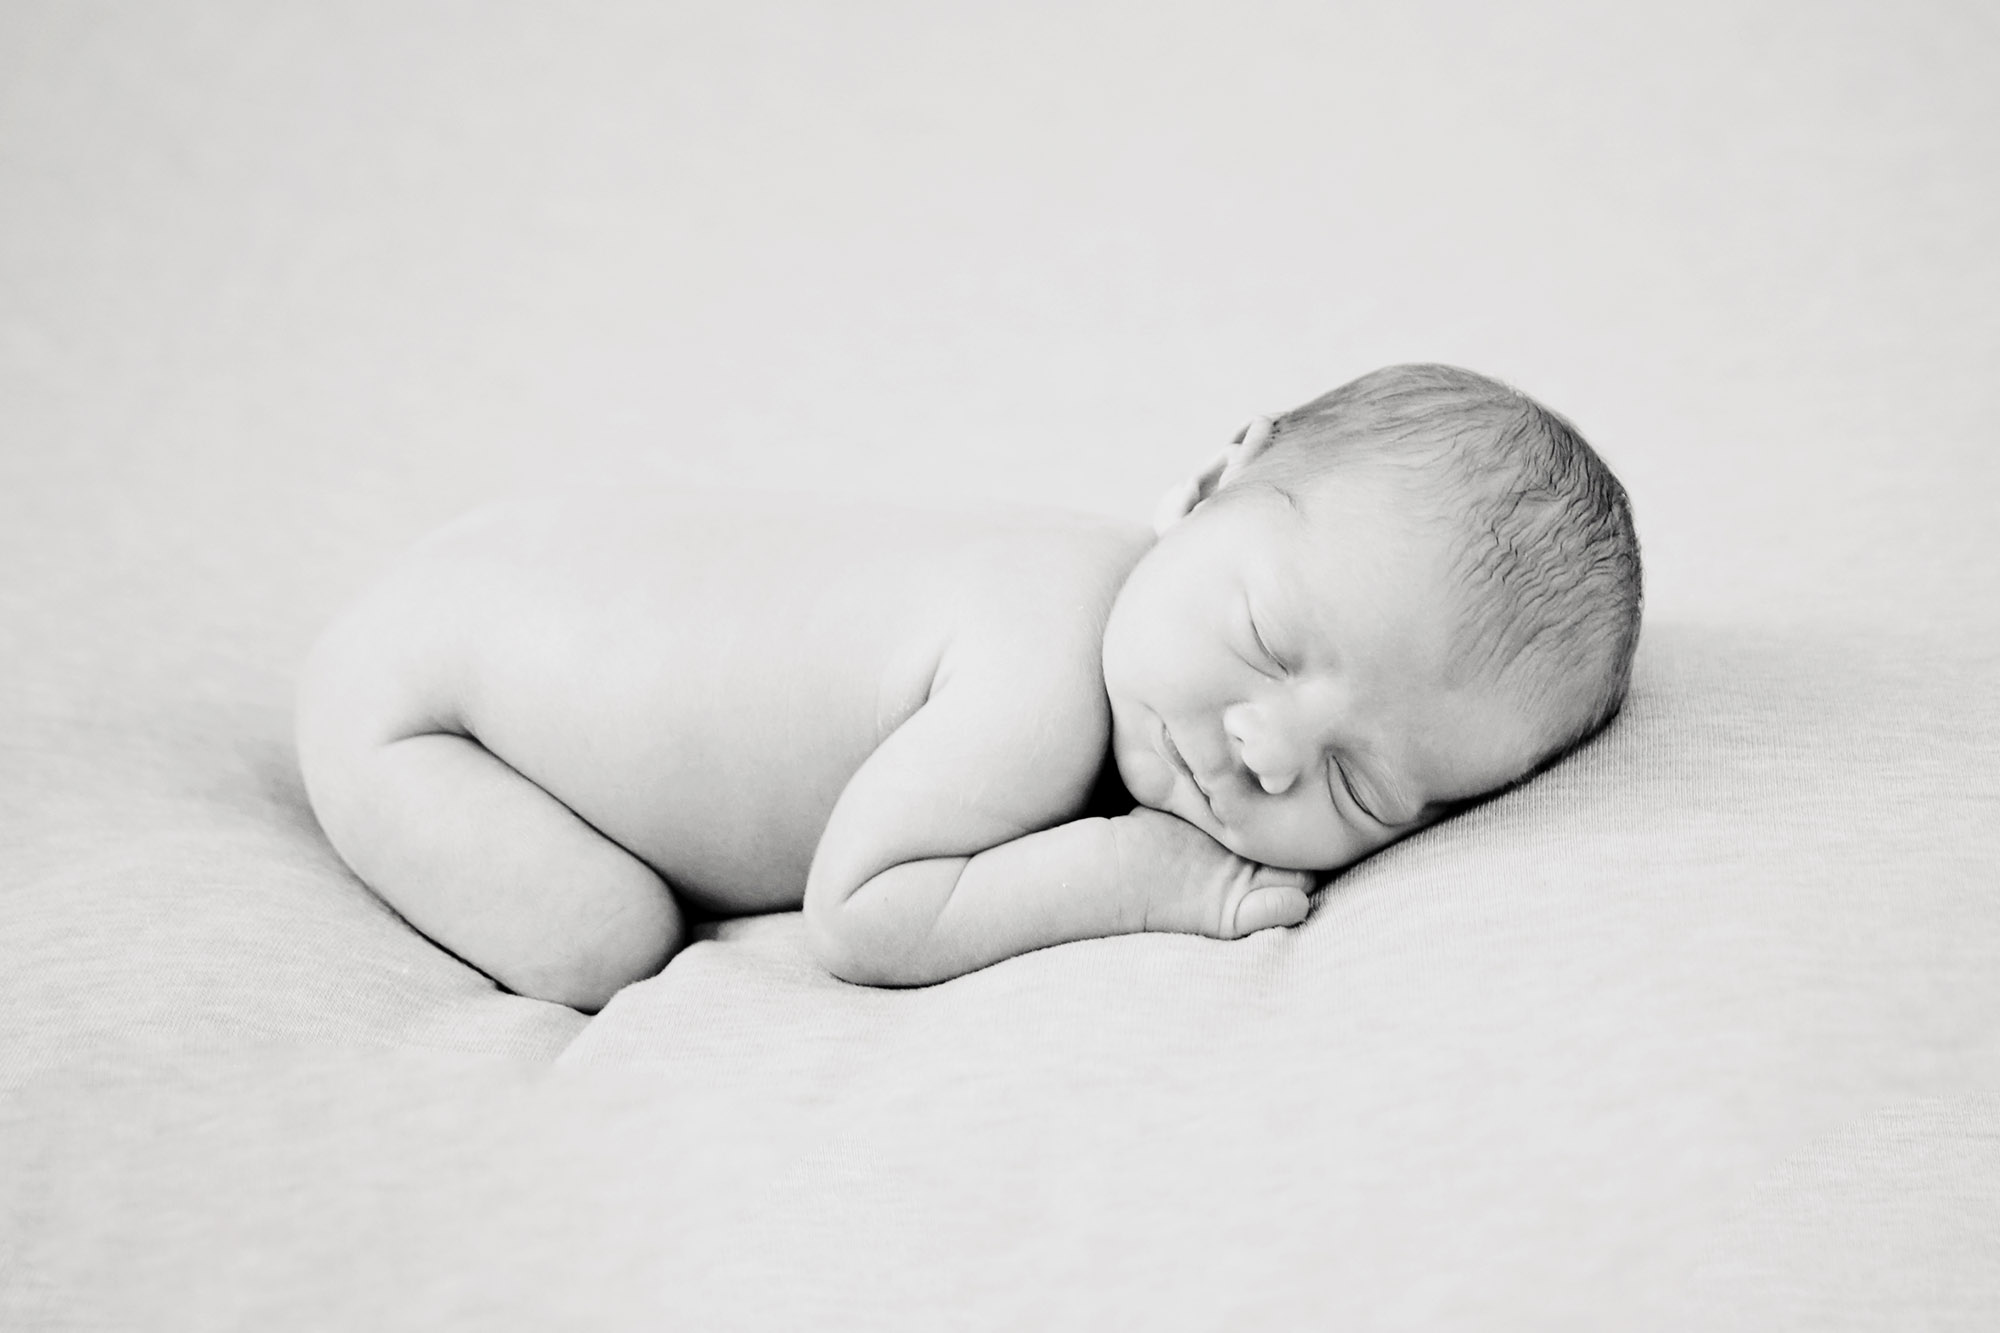 When Do I Bring My Baby In For A Newborn Photography Sitting?